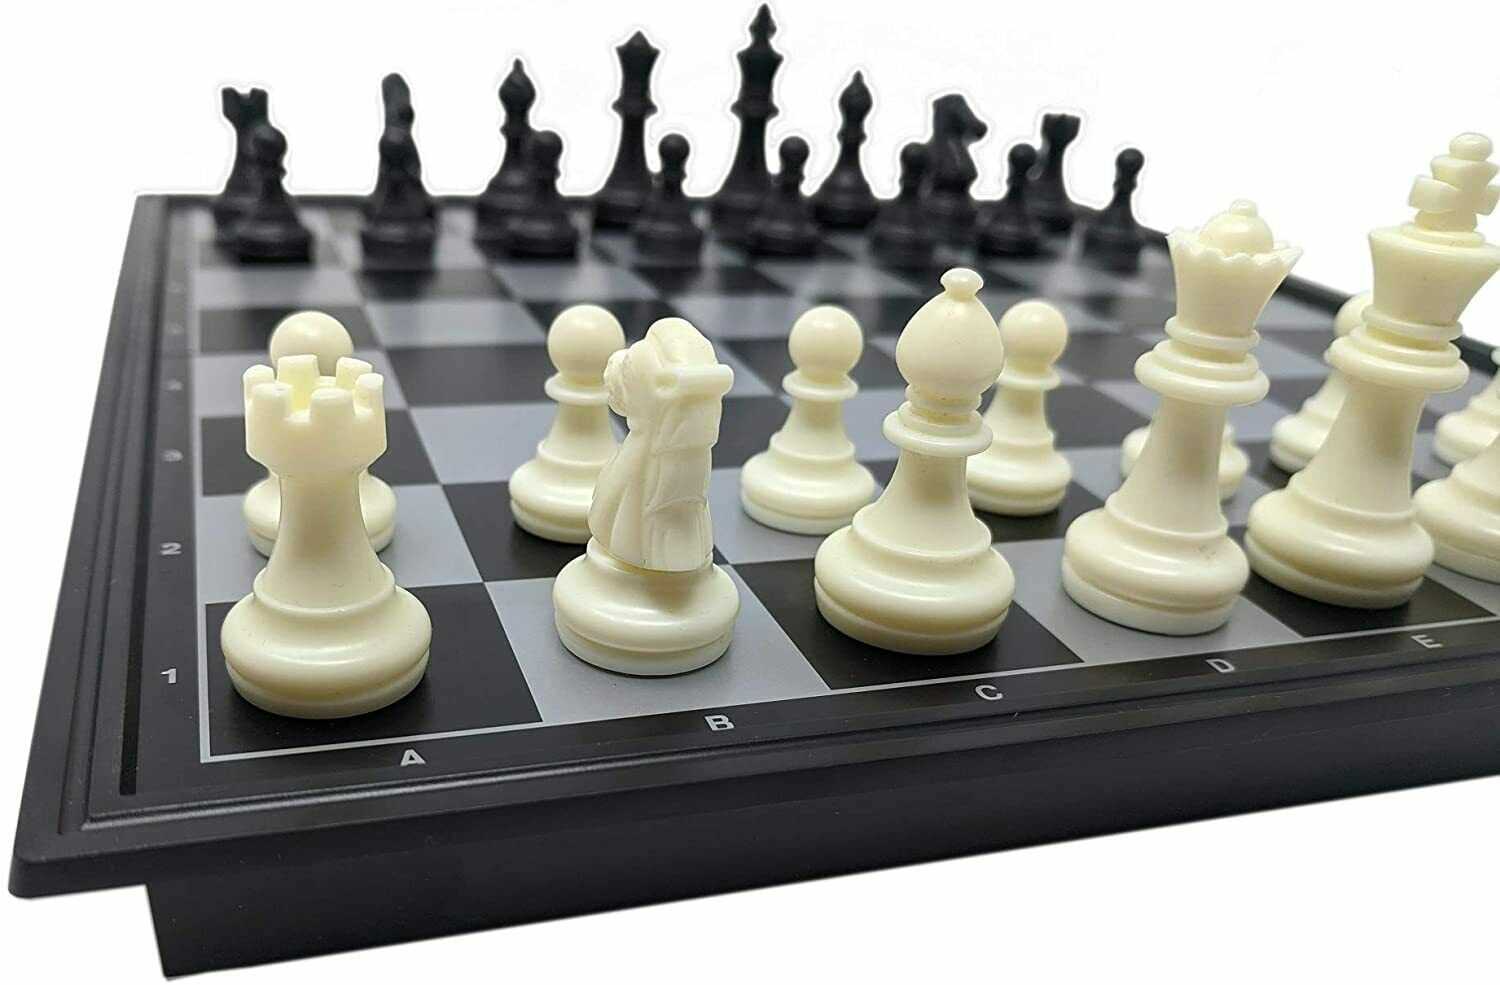 Magnetic Folding Chess Board Portable Set High Quality Games Camping Travel Xmas Gift